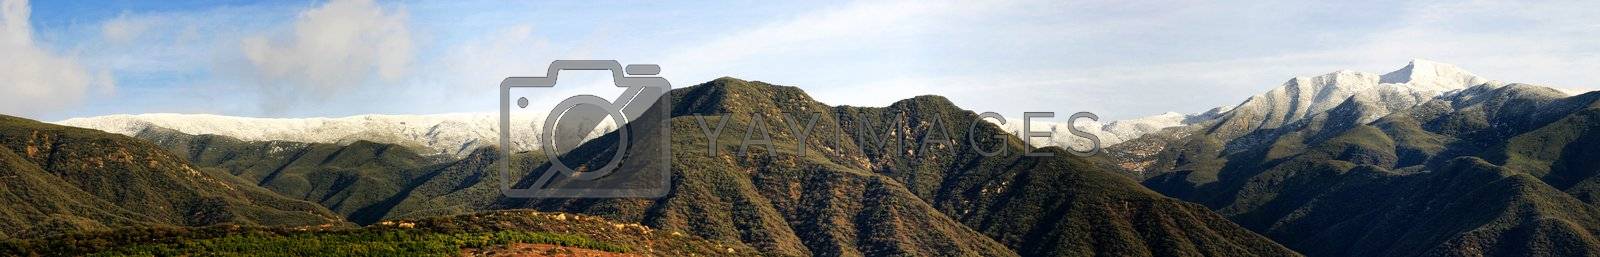 Royalty free image of Ojai Valley With Snow (P5) by hlehnerer